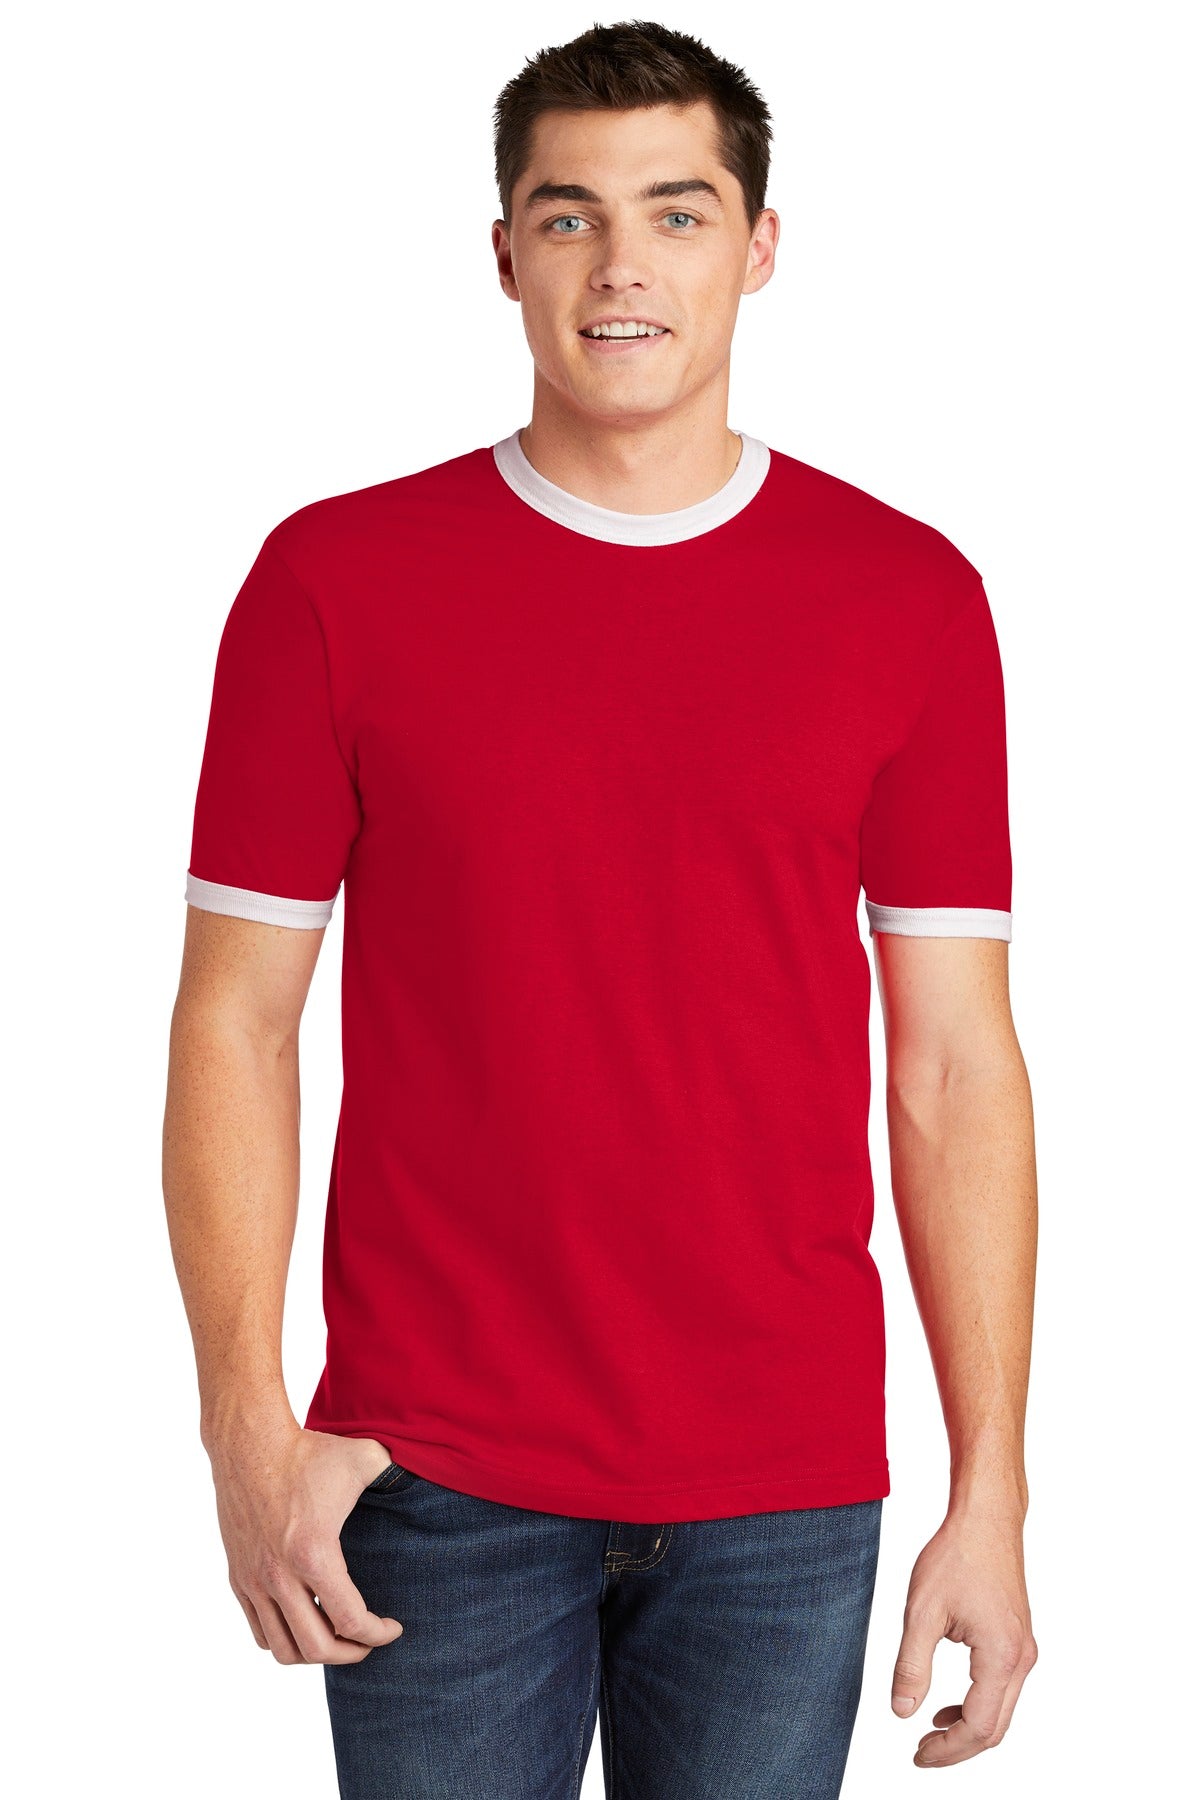 American Apparel 2410W Fine Jersey Ringer T-Shirt - Red/ White - 2XL